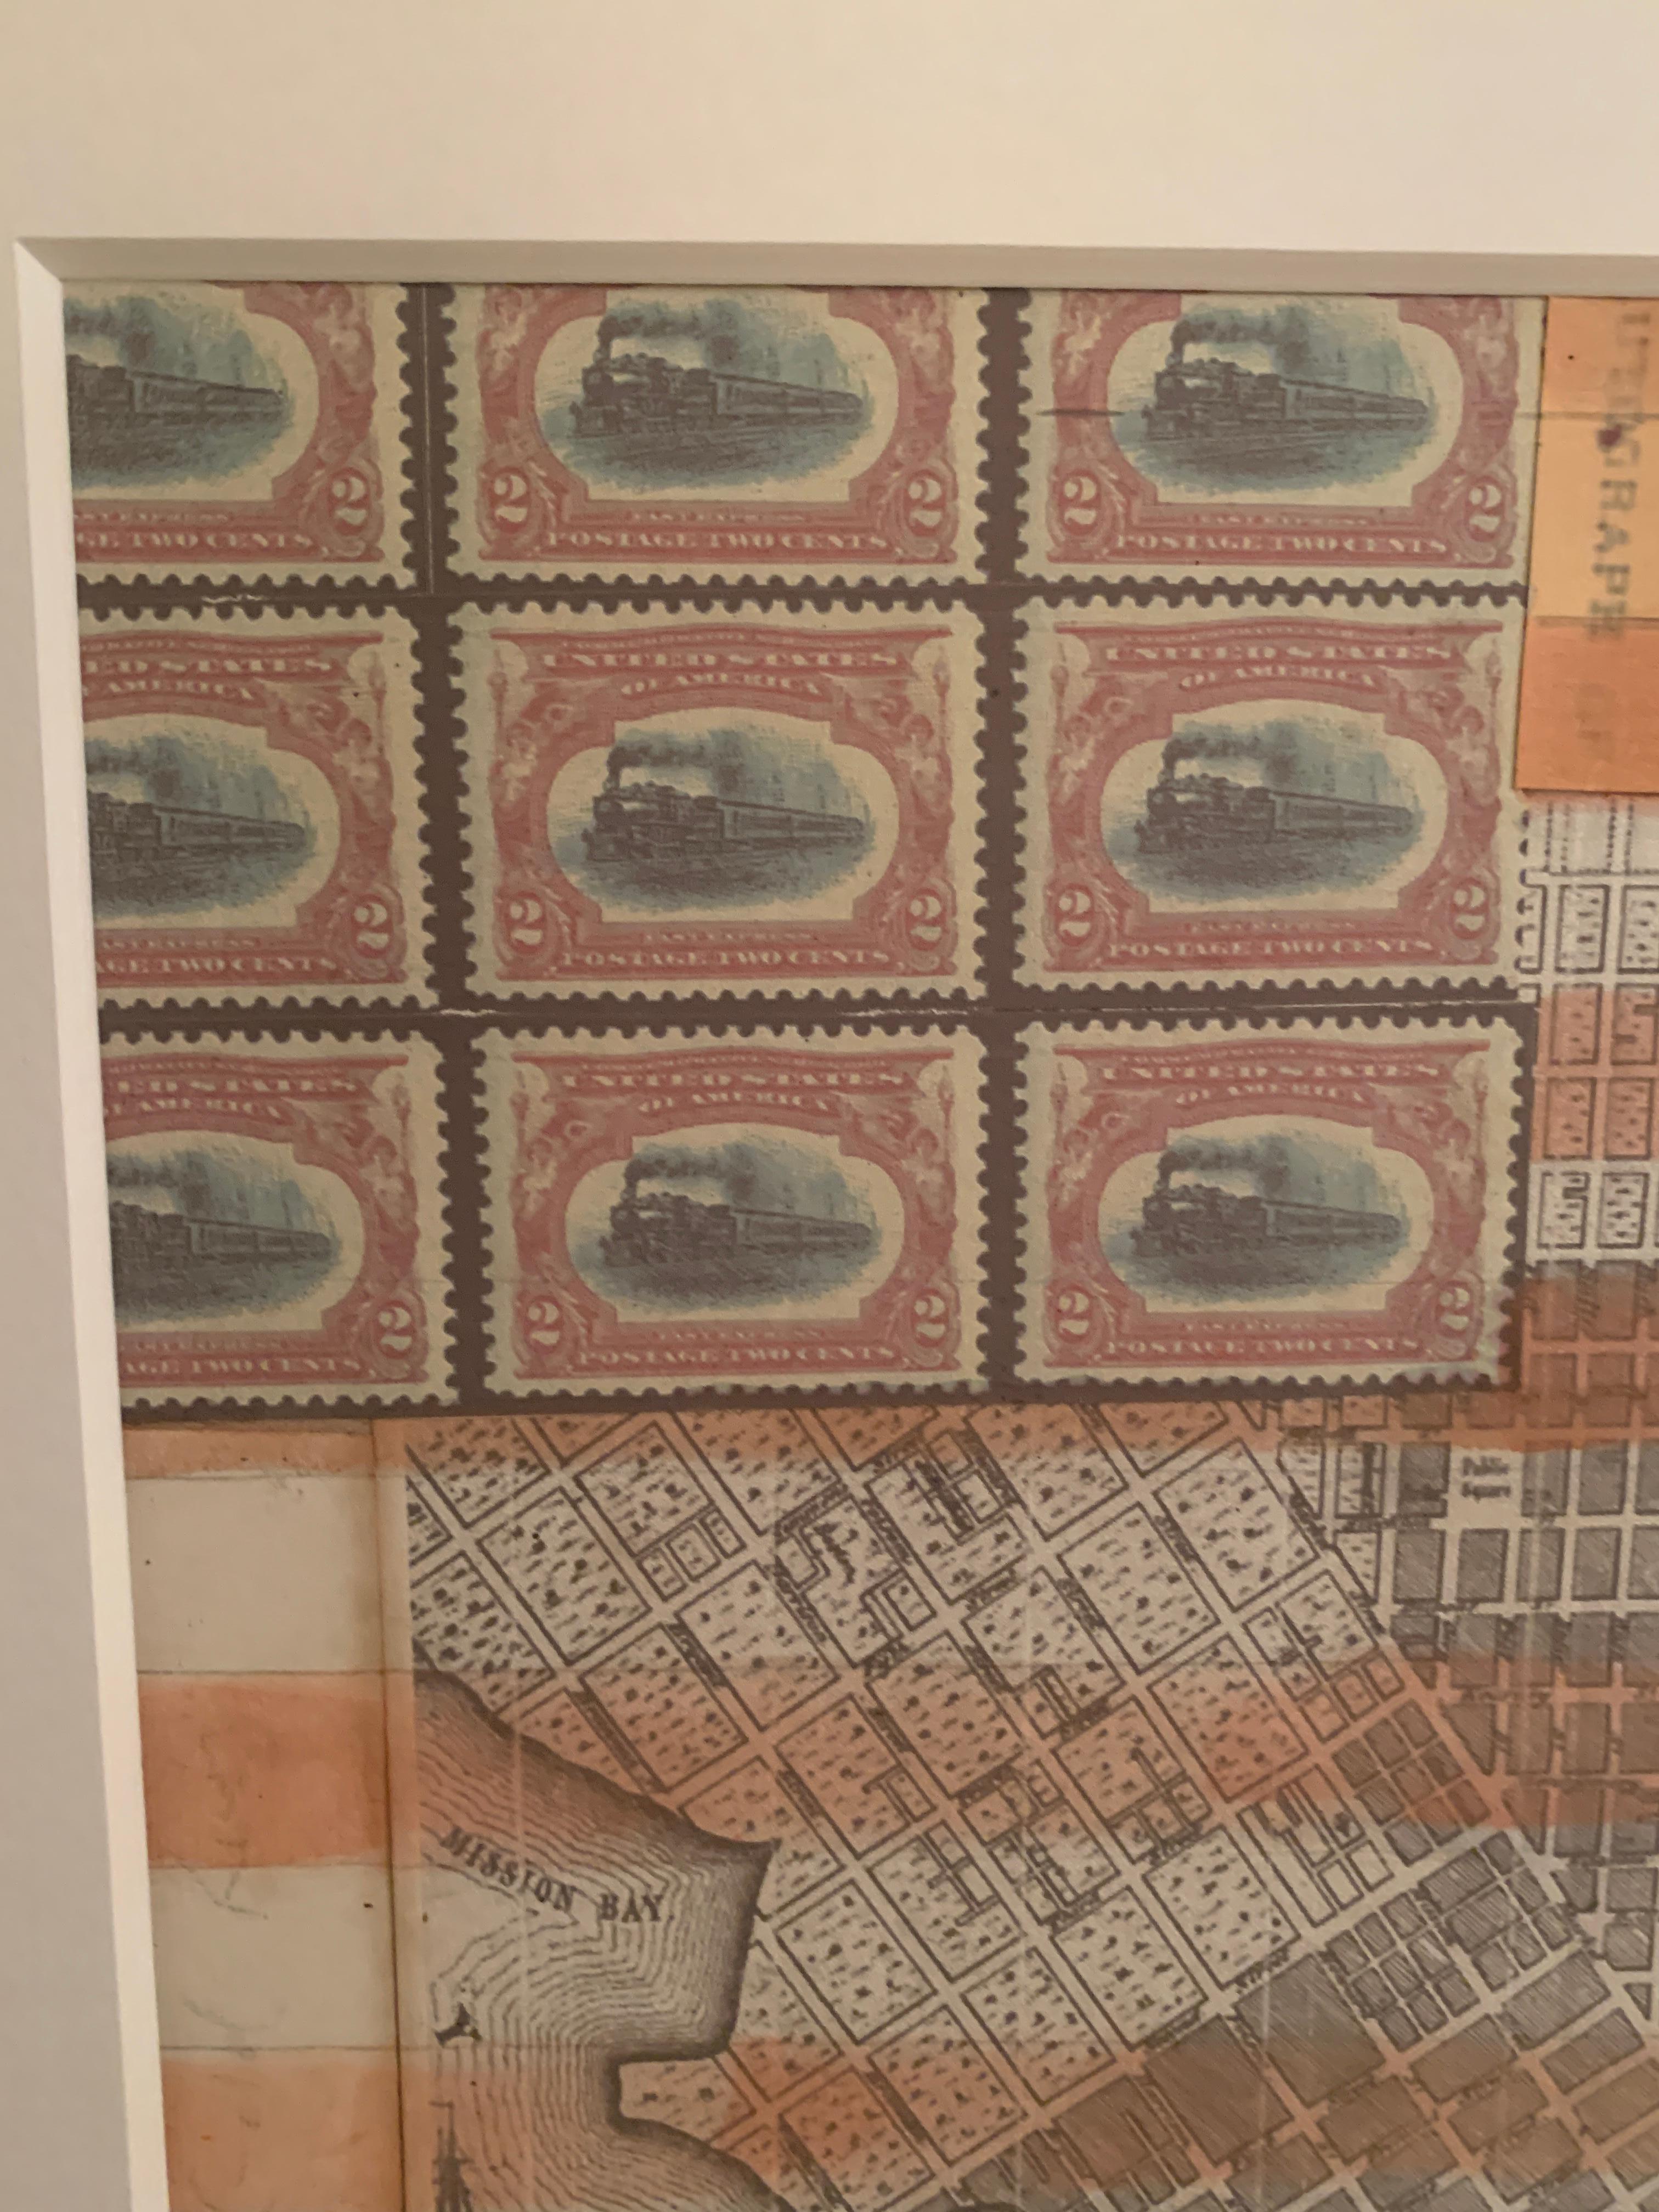 American flag collage with hand colored scene of 19th c San Francisco California - Art by Claude Howard Stuart